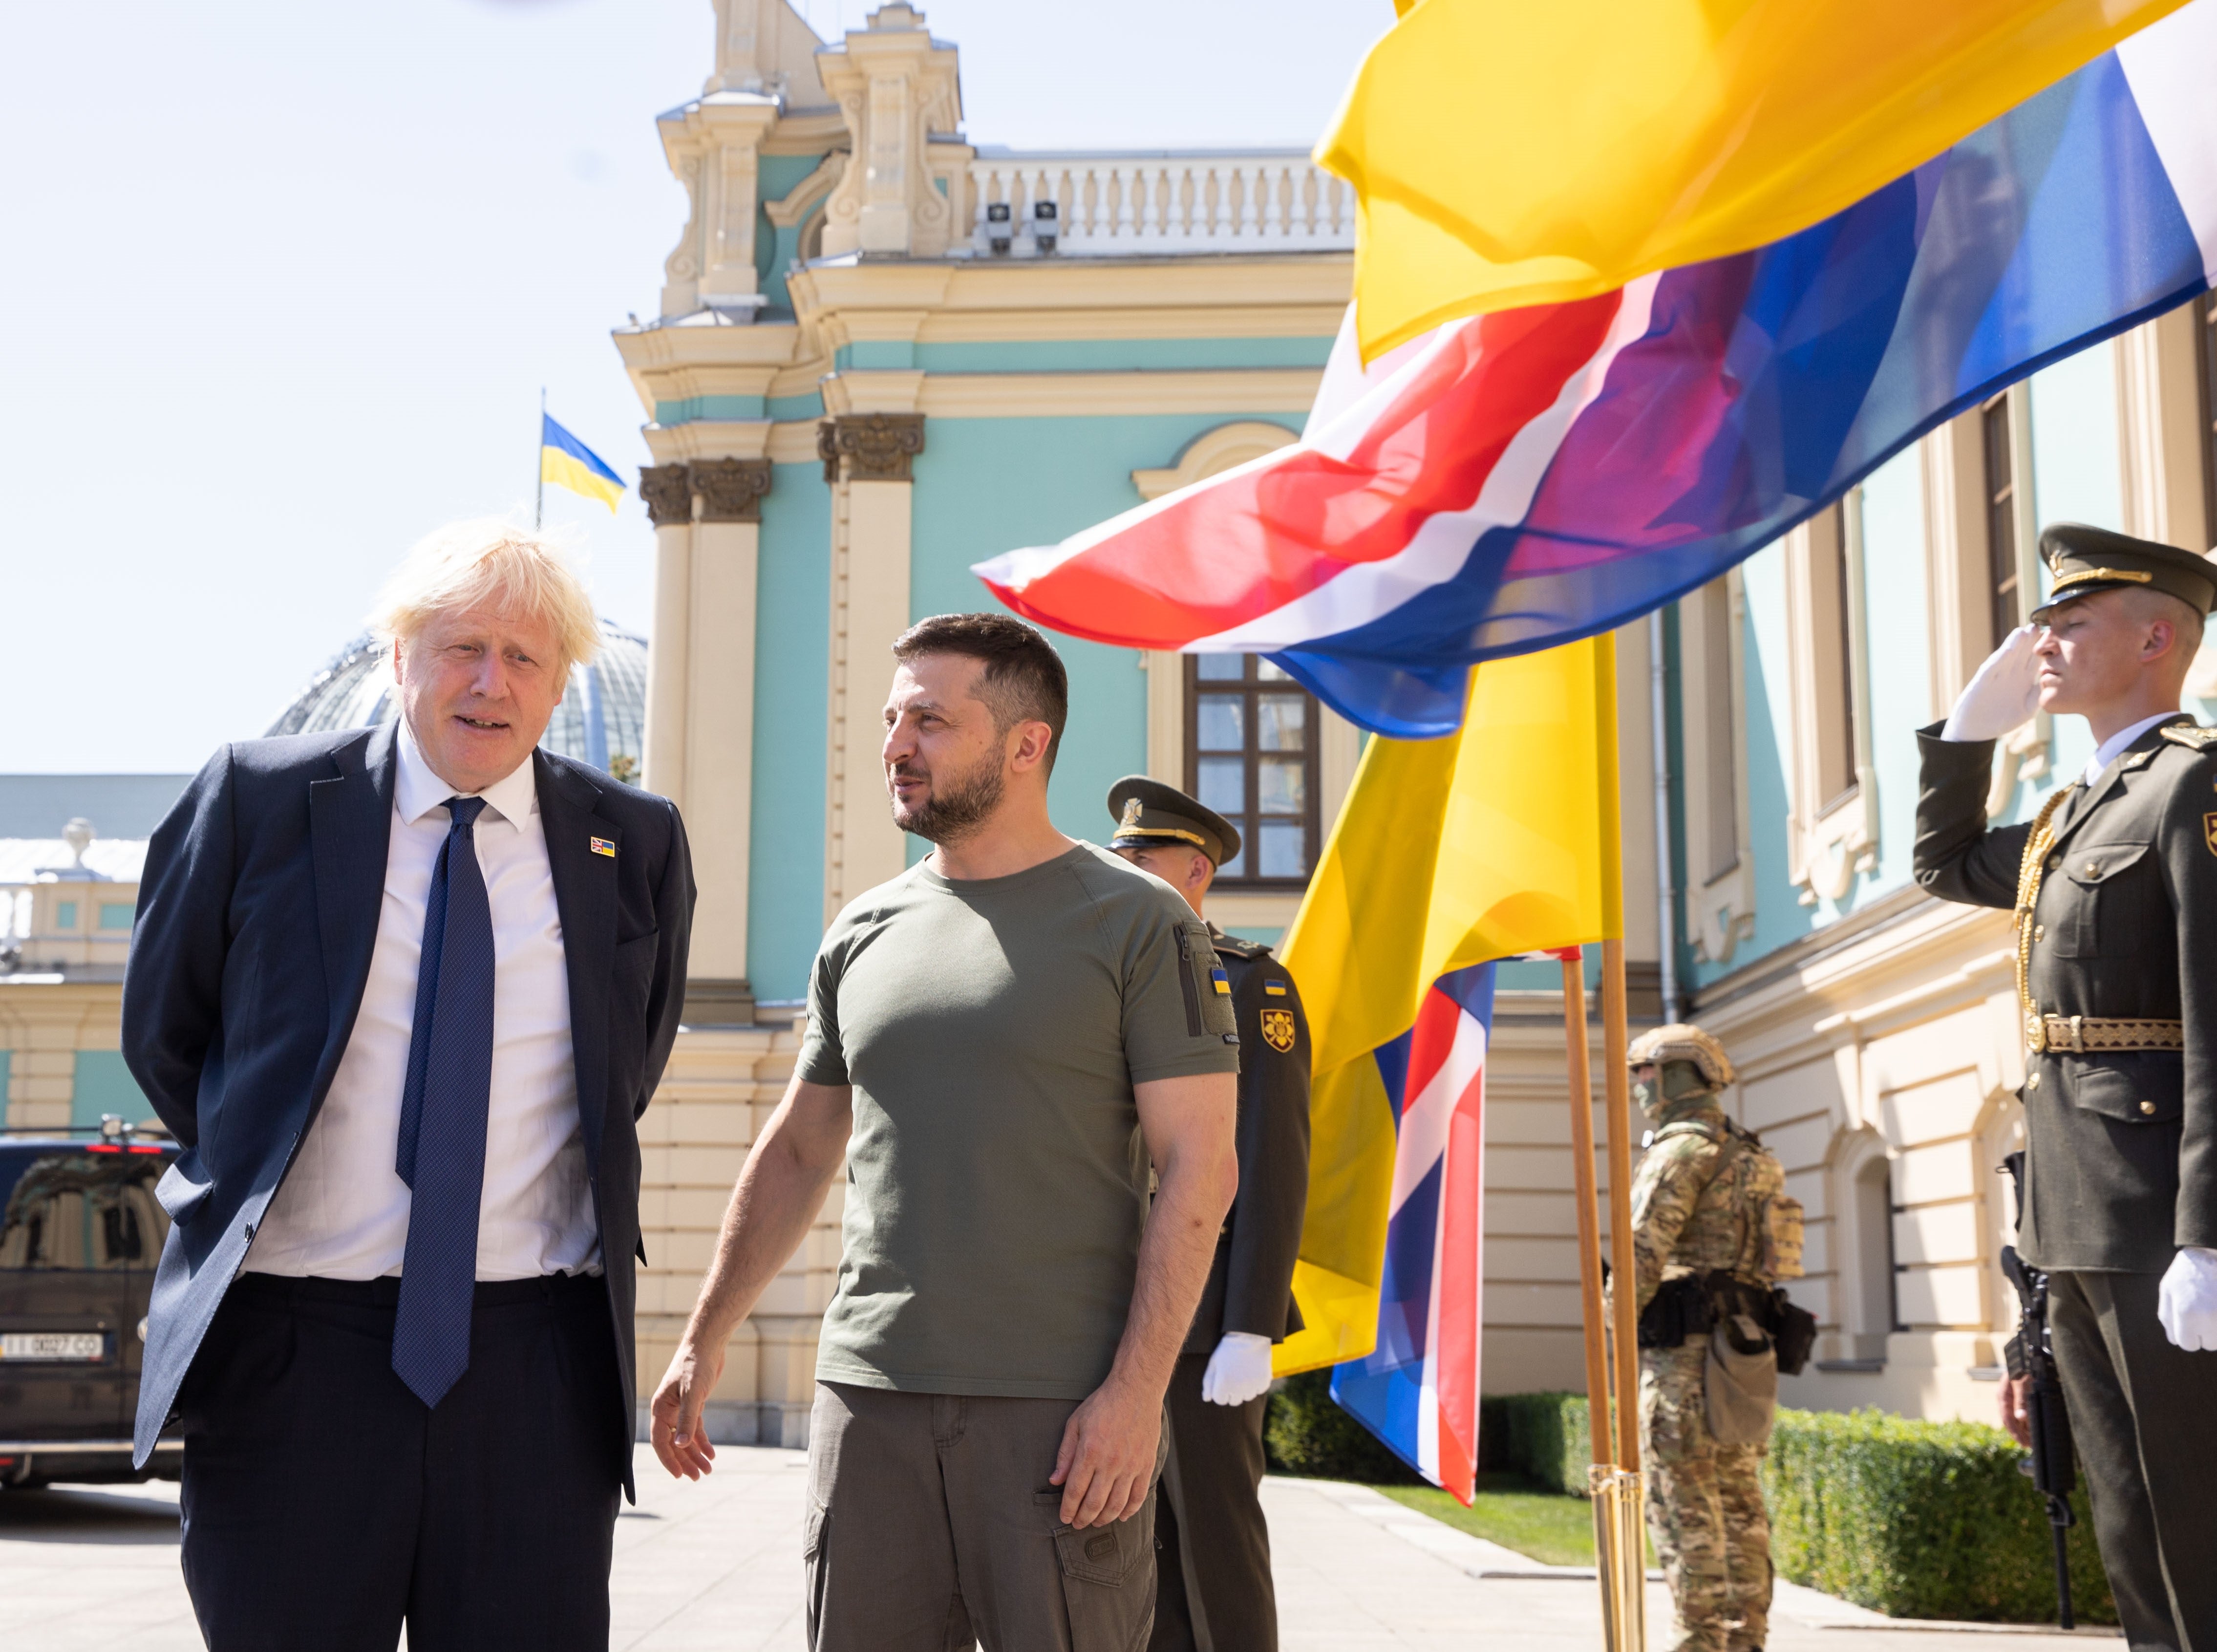 Handout photo issued by the Ukrainian Presidential Press Office of Ukrainian President Volodymyr Zelensky (right) meeting Prime Minister Boris Johnson, who has made a surprise visit to Volodymyr Zelensky in Kyiv in support of Ukraine as it marks 31 years of independence from the Soviet Union. Picture date: Wednesday August 24, 2022.